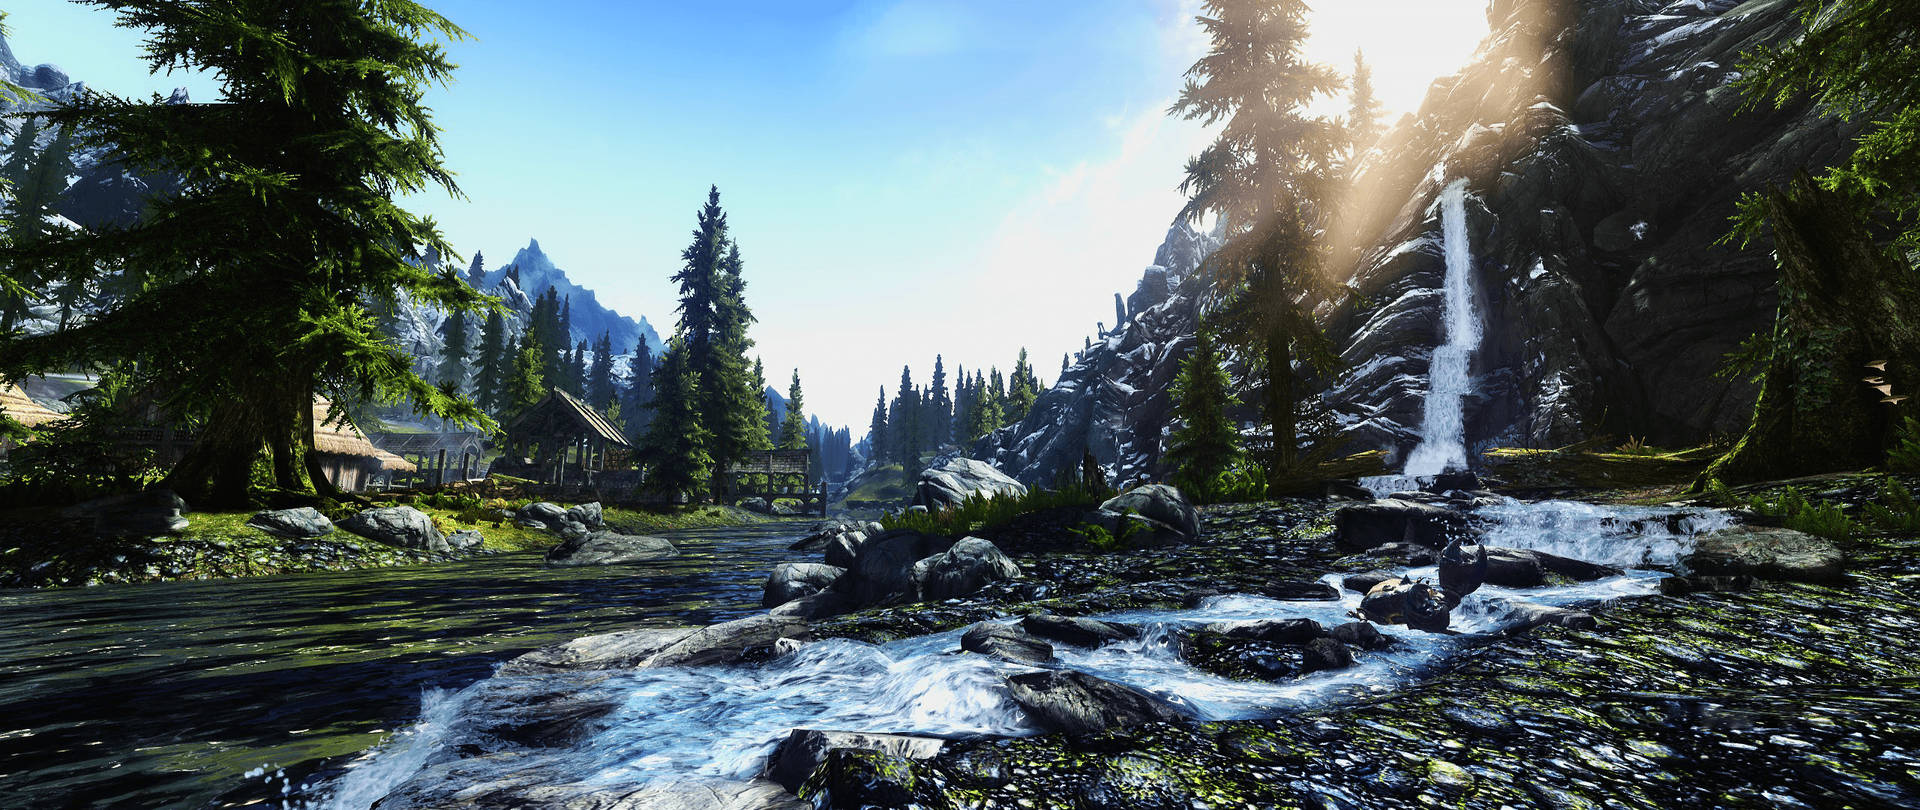 A Screenshot Of A Forest With A Waterfall Wallpaper